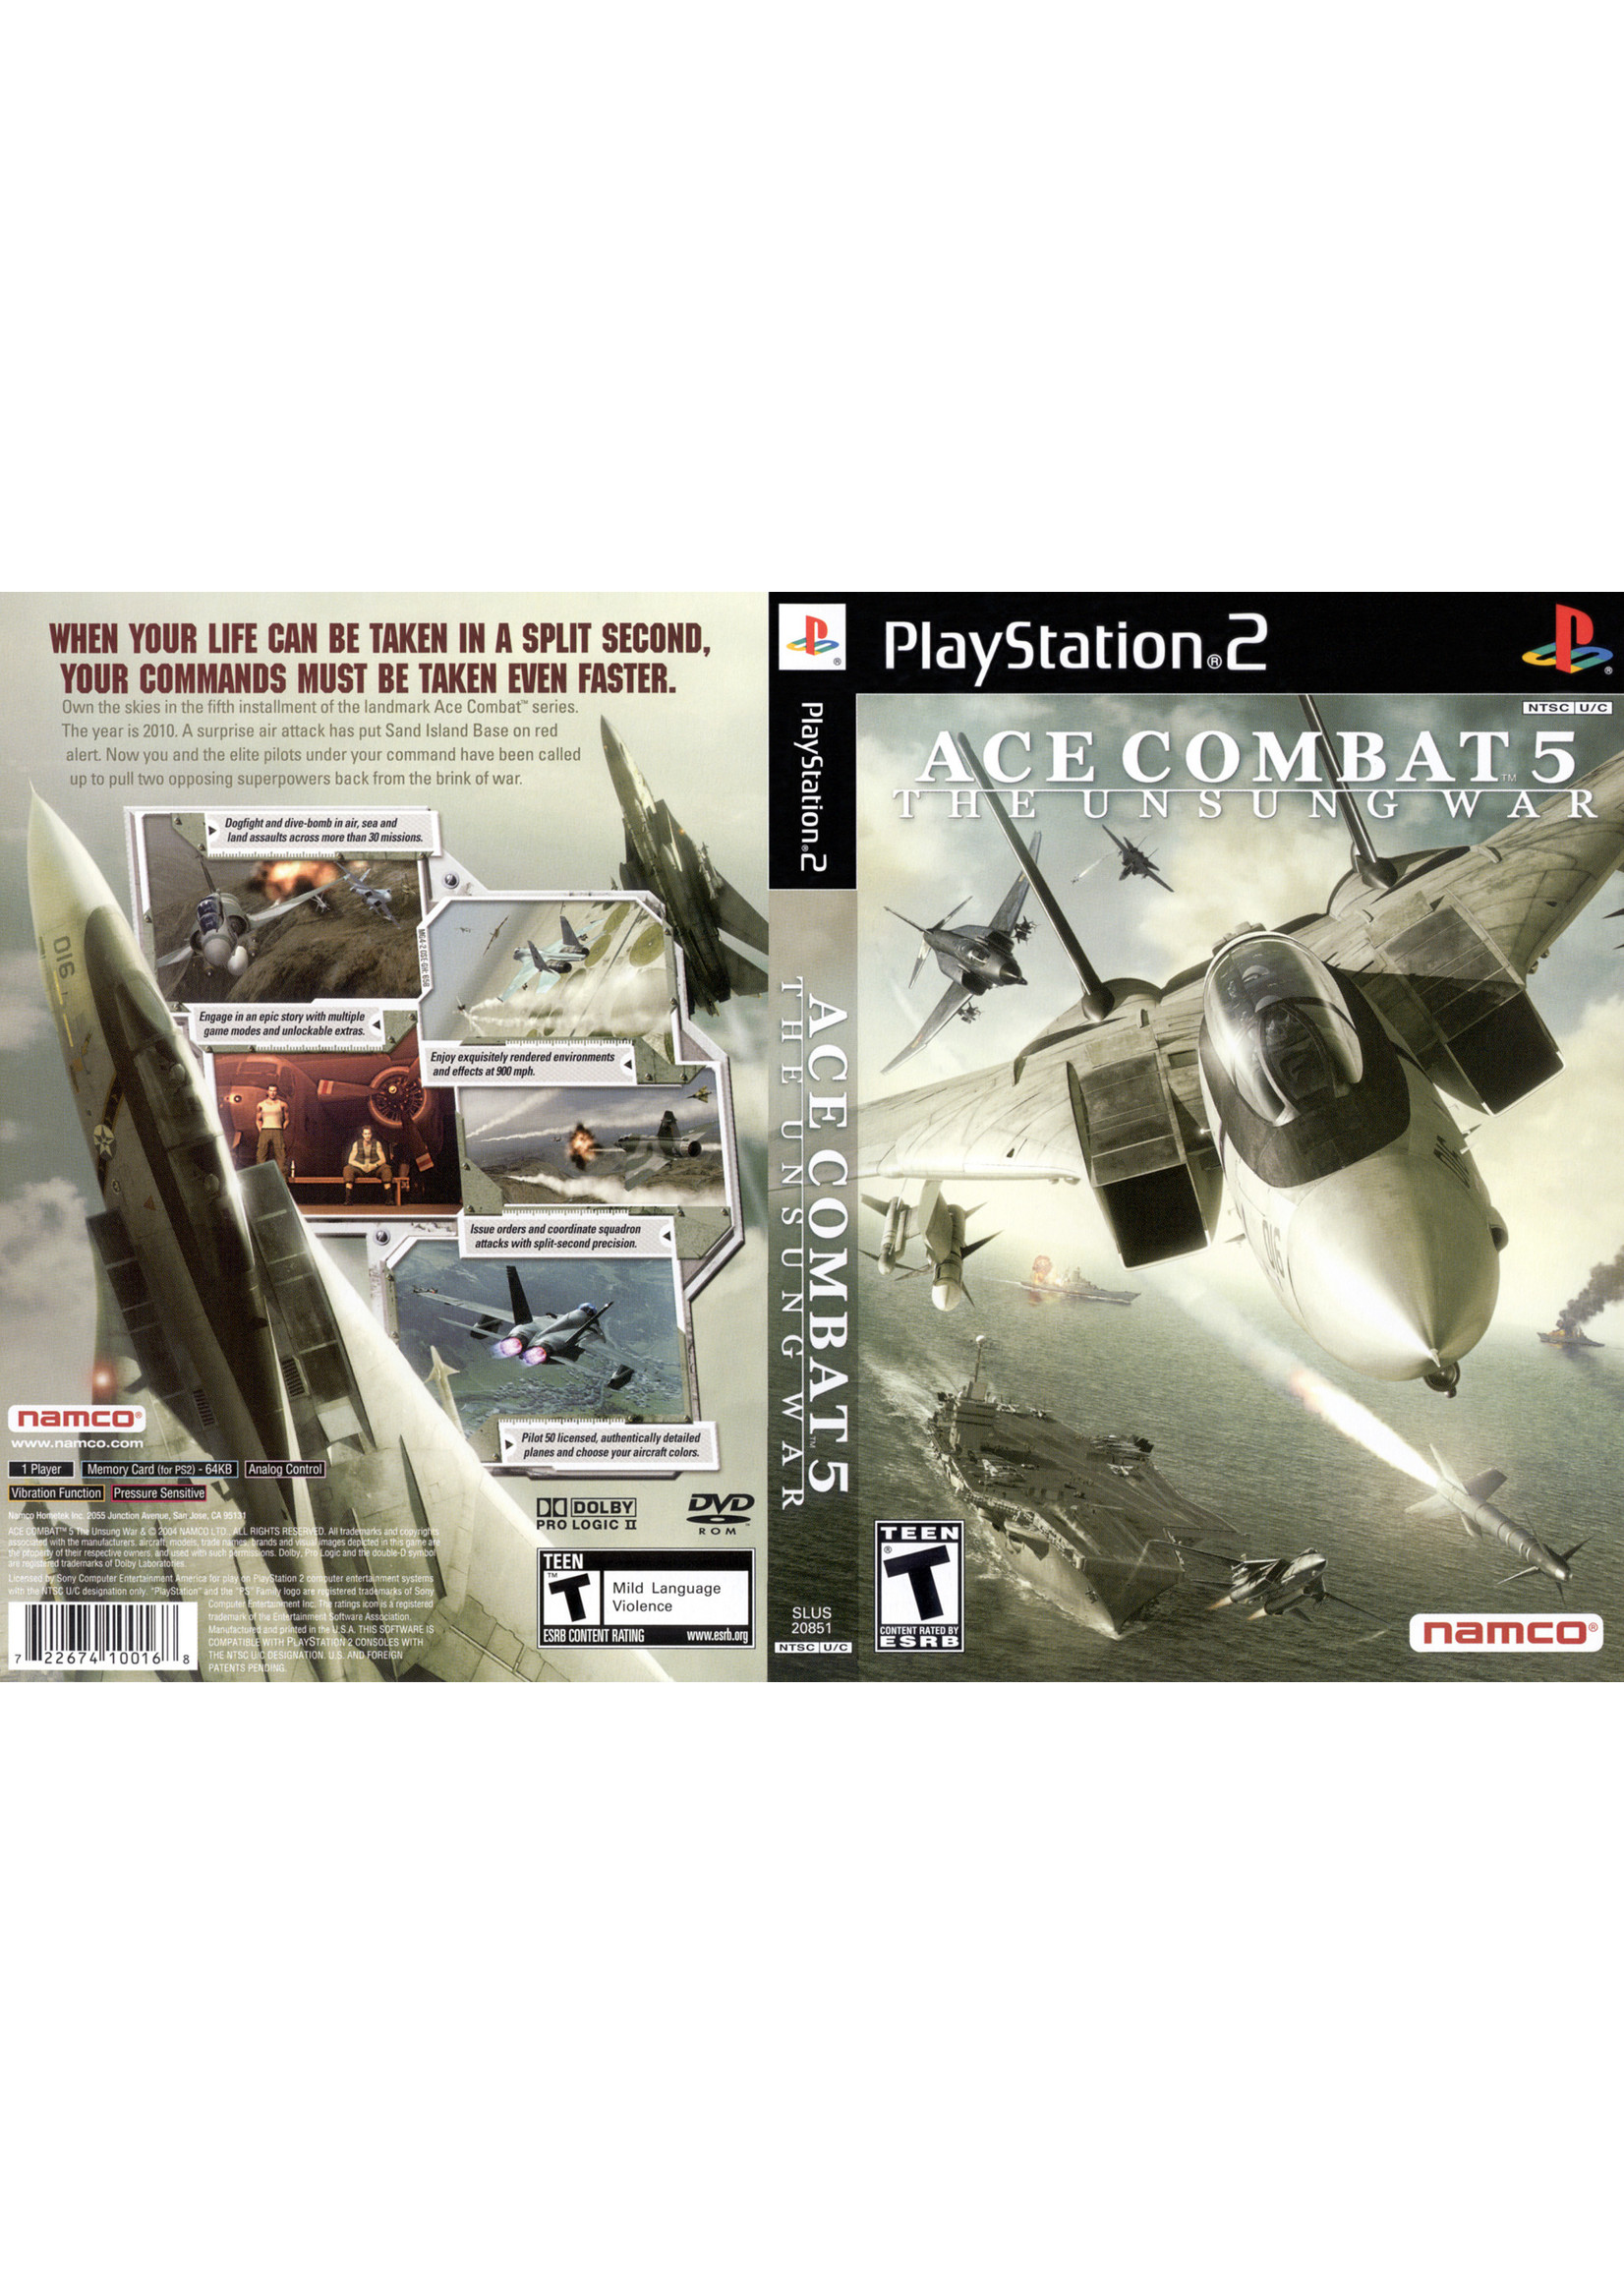 Sony Playstation 2 (PS2) Ace Combat 5 Unsung War